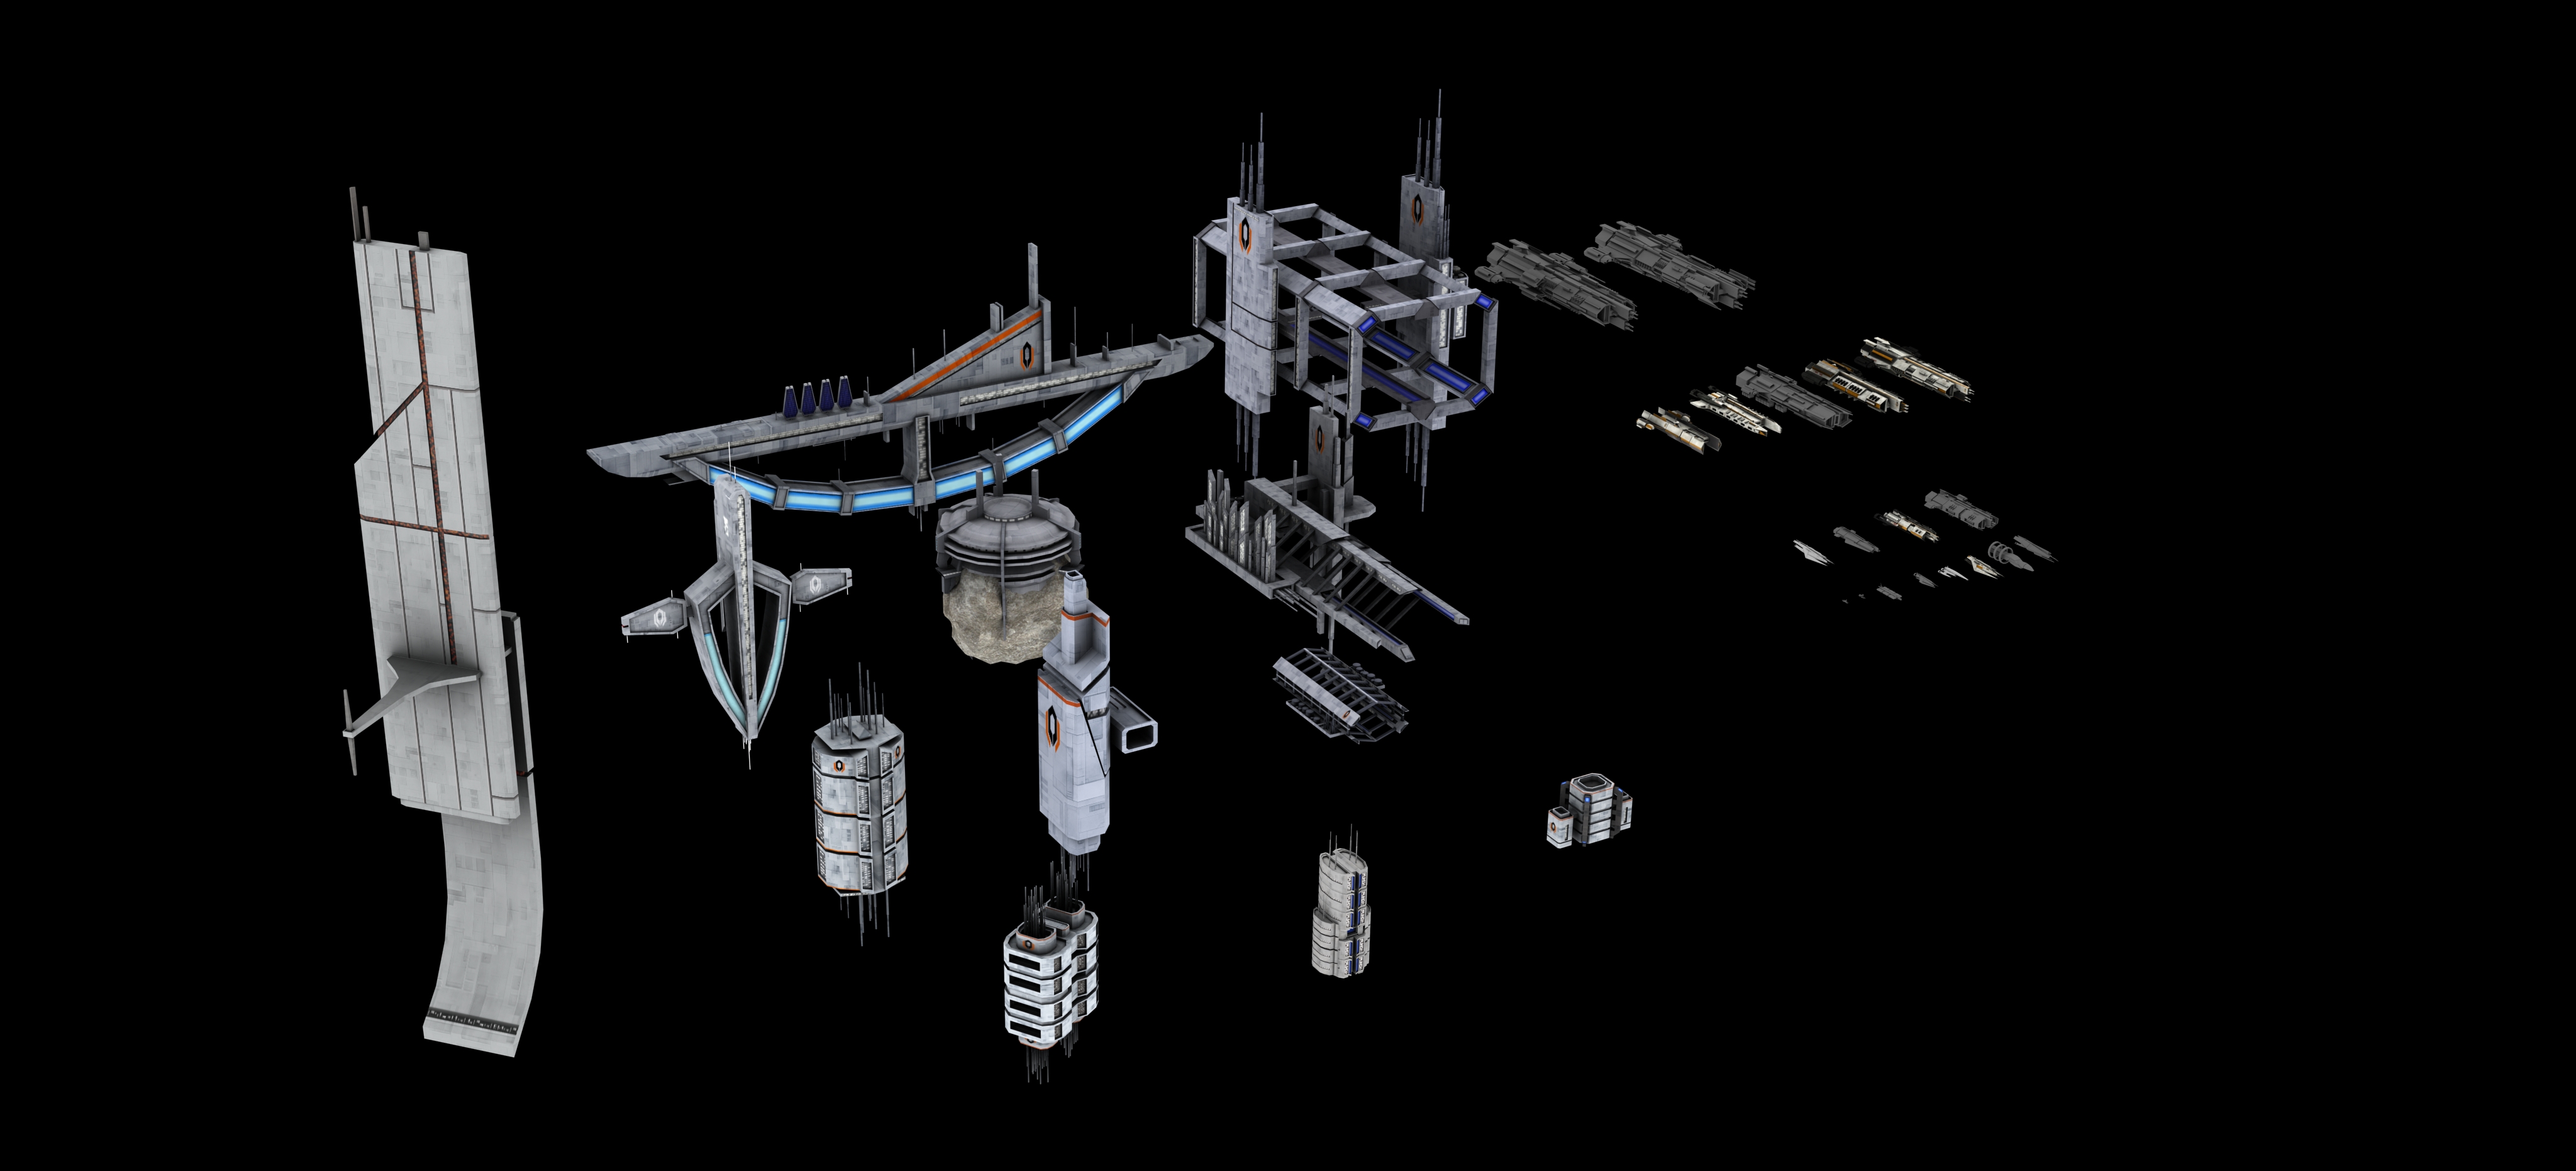 Cerberus' Stations are done! image - Dawn of the Reapers mod for Sins ...